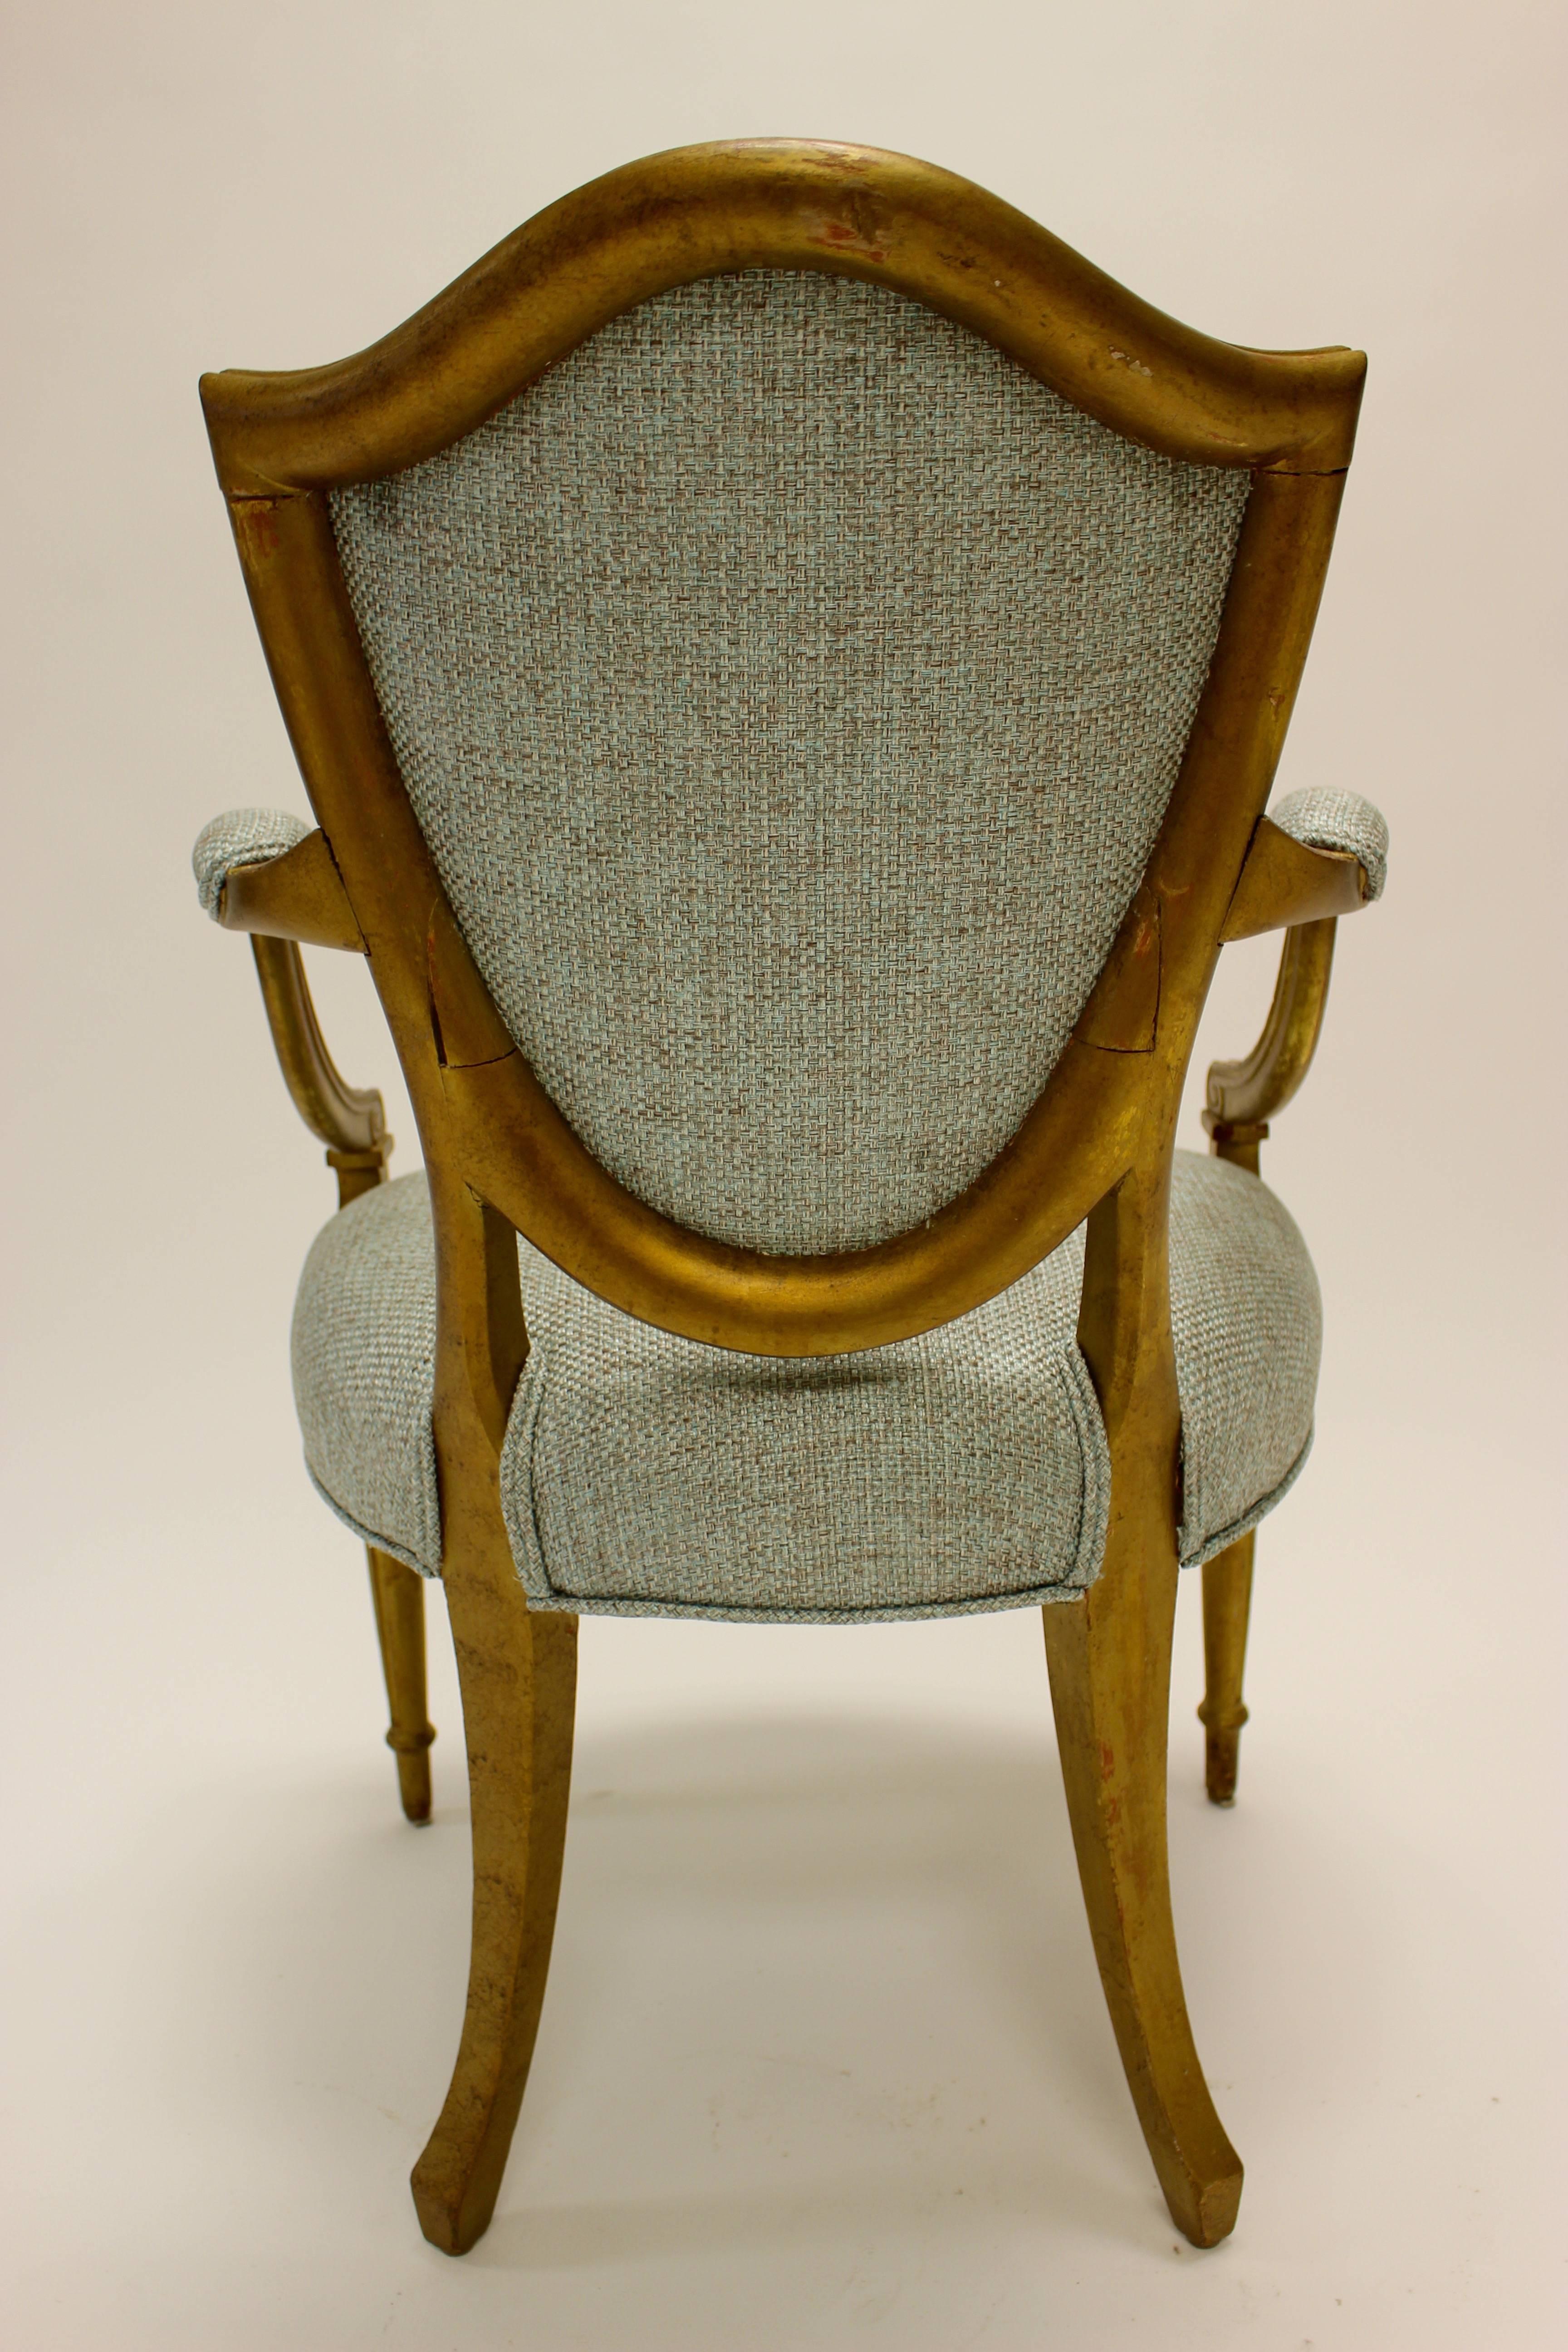 Carved 19th Century Hepplewhite Style Shield-Back Parcel-Gilt Armchair with Open Arms